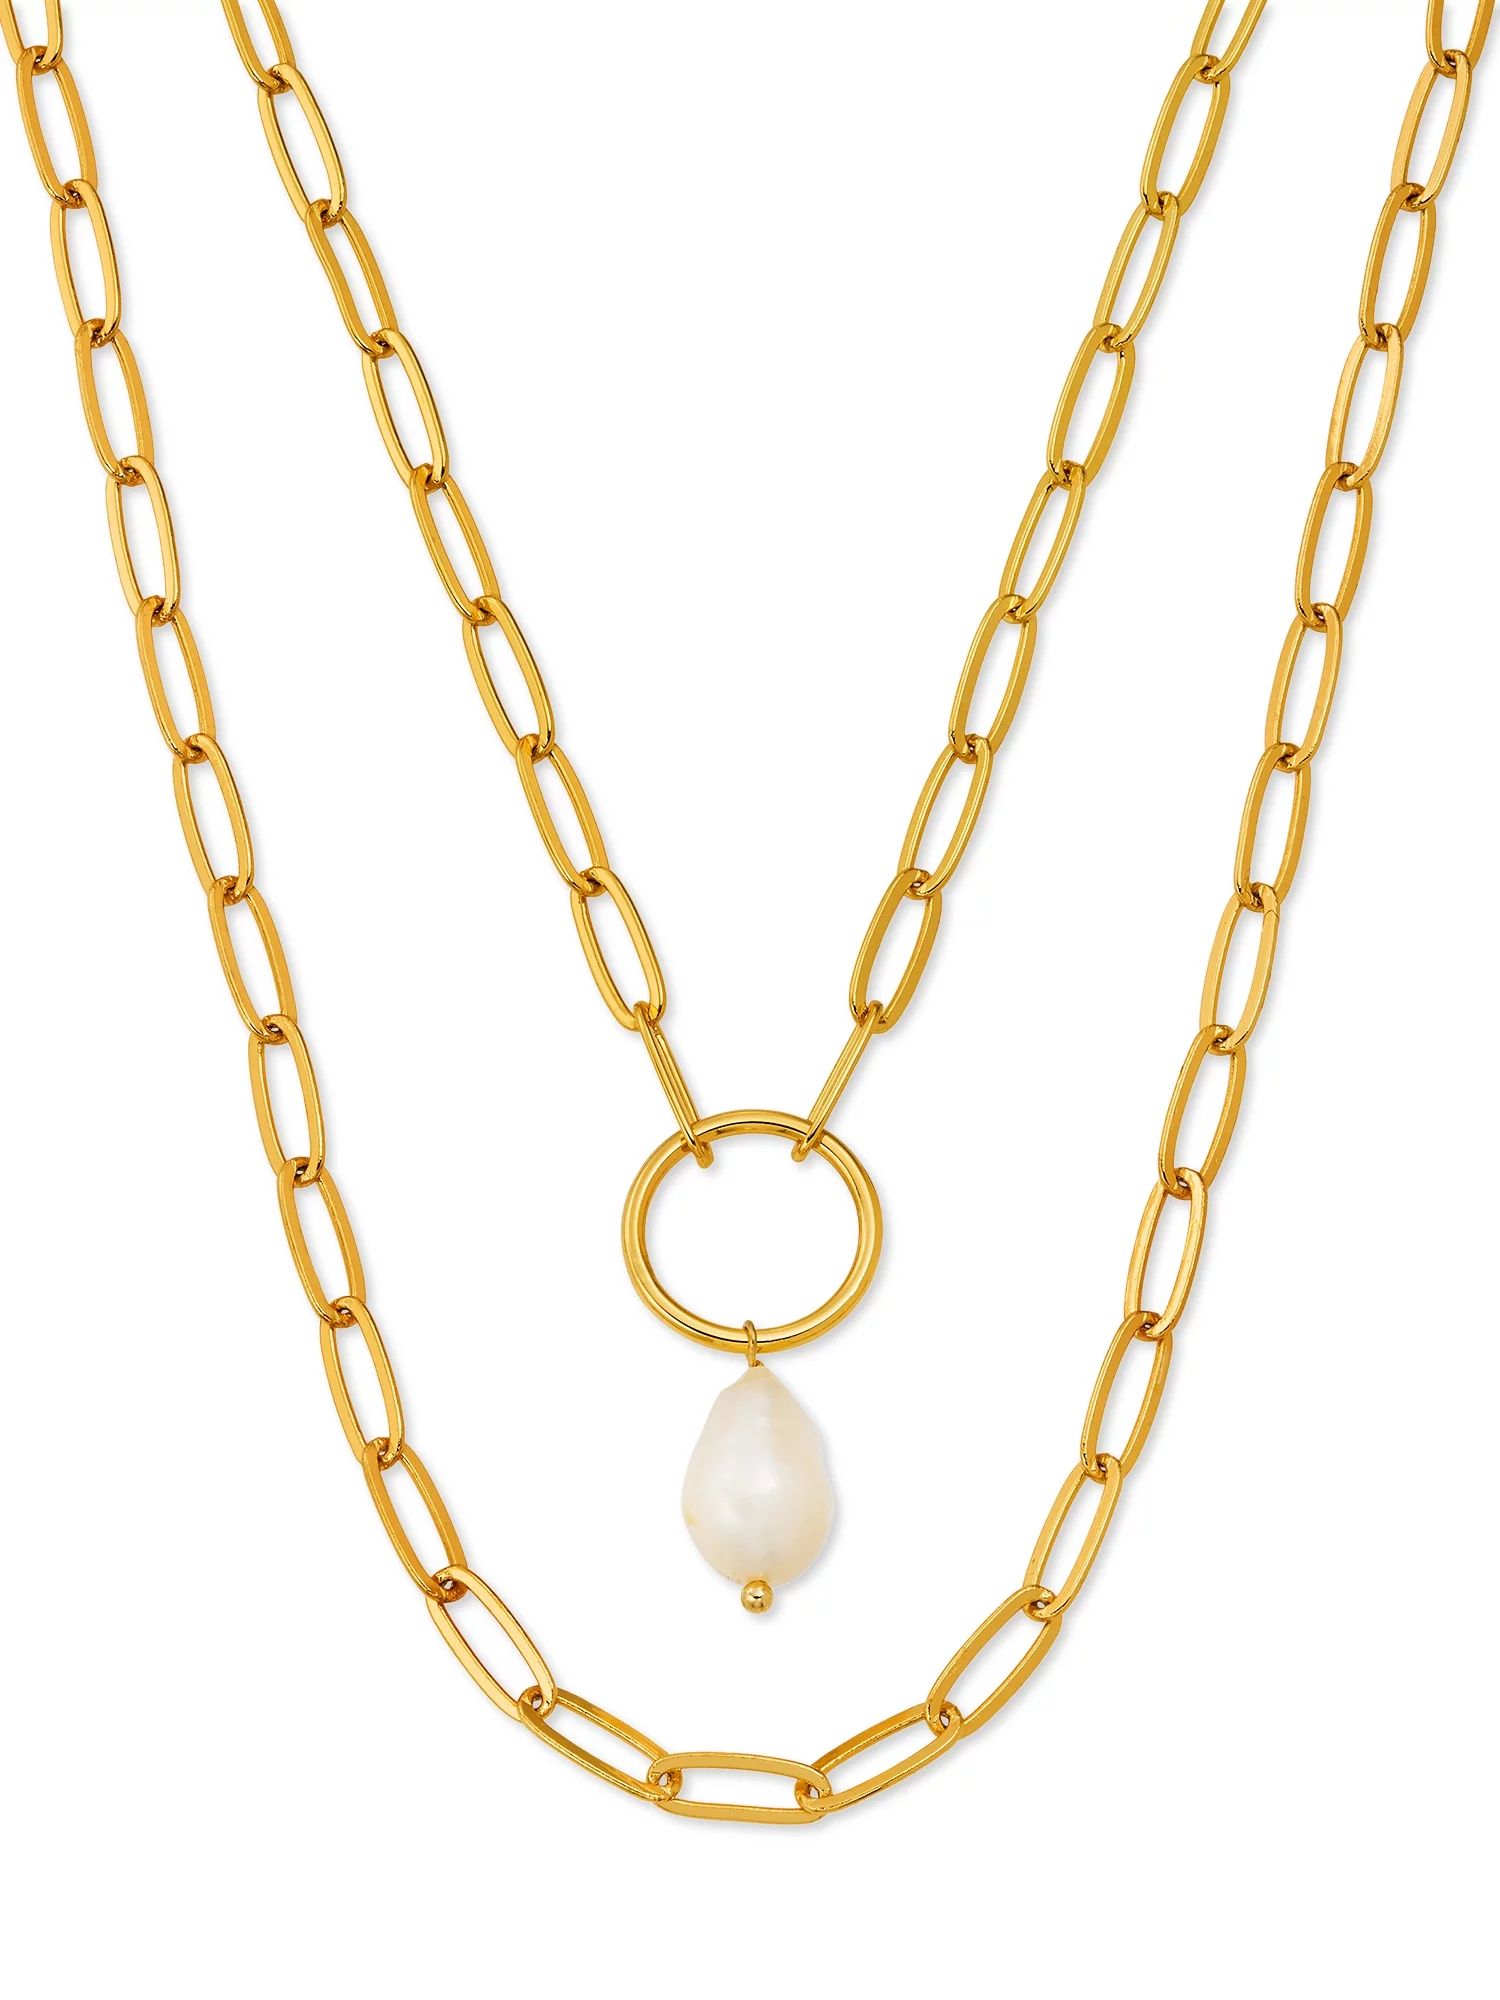 Scoop Brass Yellow Gold-Plated Layered Imitation Pearl Link Necklace, 15" + 3" Extender | Walmart (US)